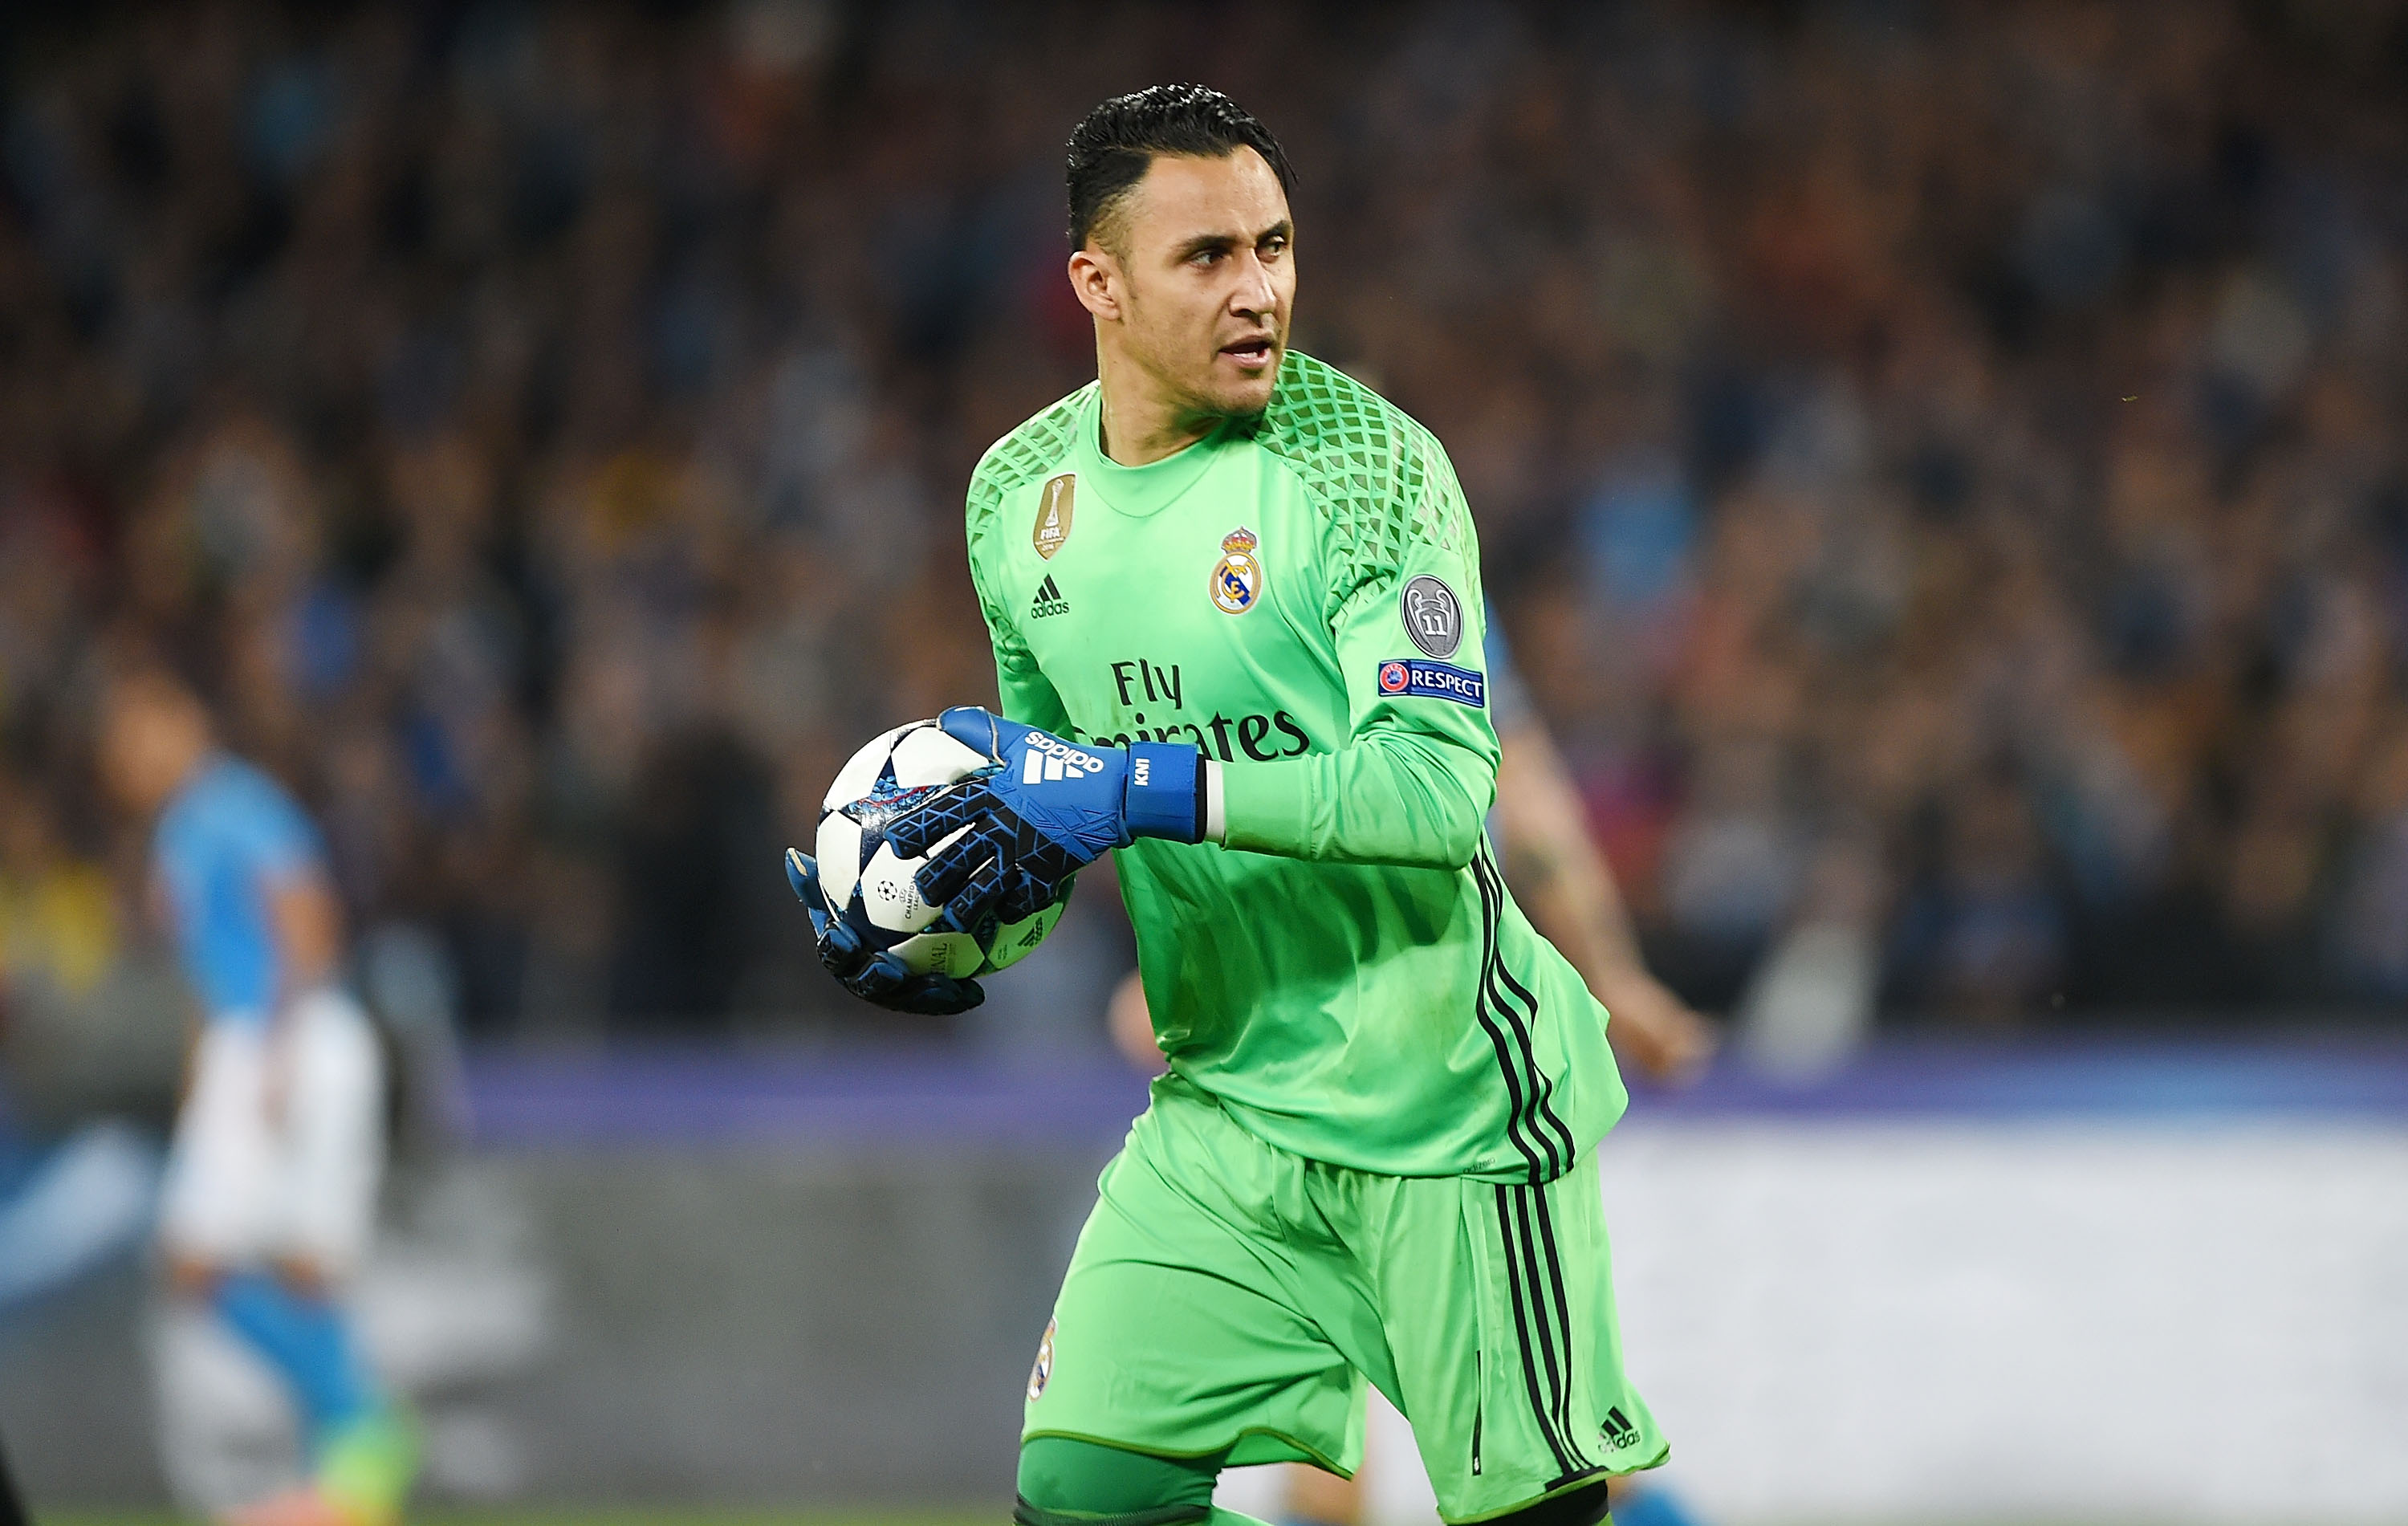 NAPLES, ITALY - MARCH 07: Keylor Navas of Real Madrid CF in action during the UEFA Champions League Round of 16 second leg match between SSC Napoli and Real Madrid CF at Stadio San Paolo on March 7, 2017 in Naples, Italy.  (Photo by Francesco Pecoraro/Getty Images)